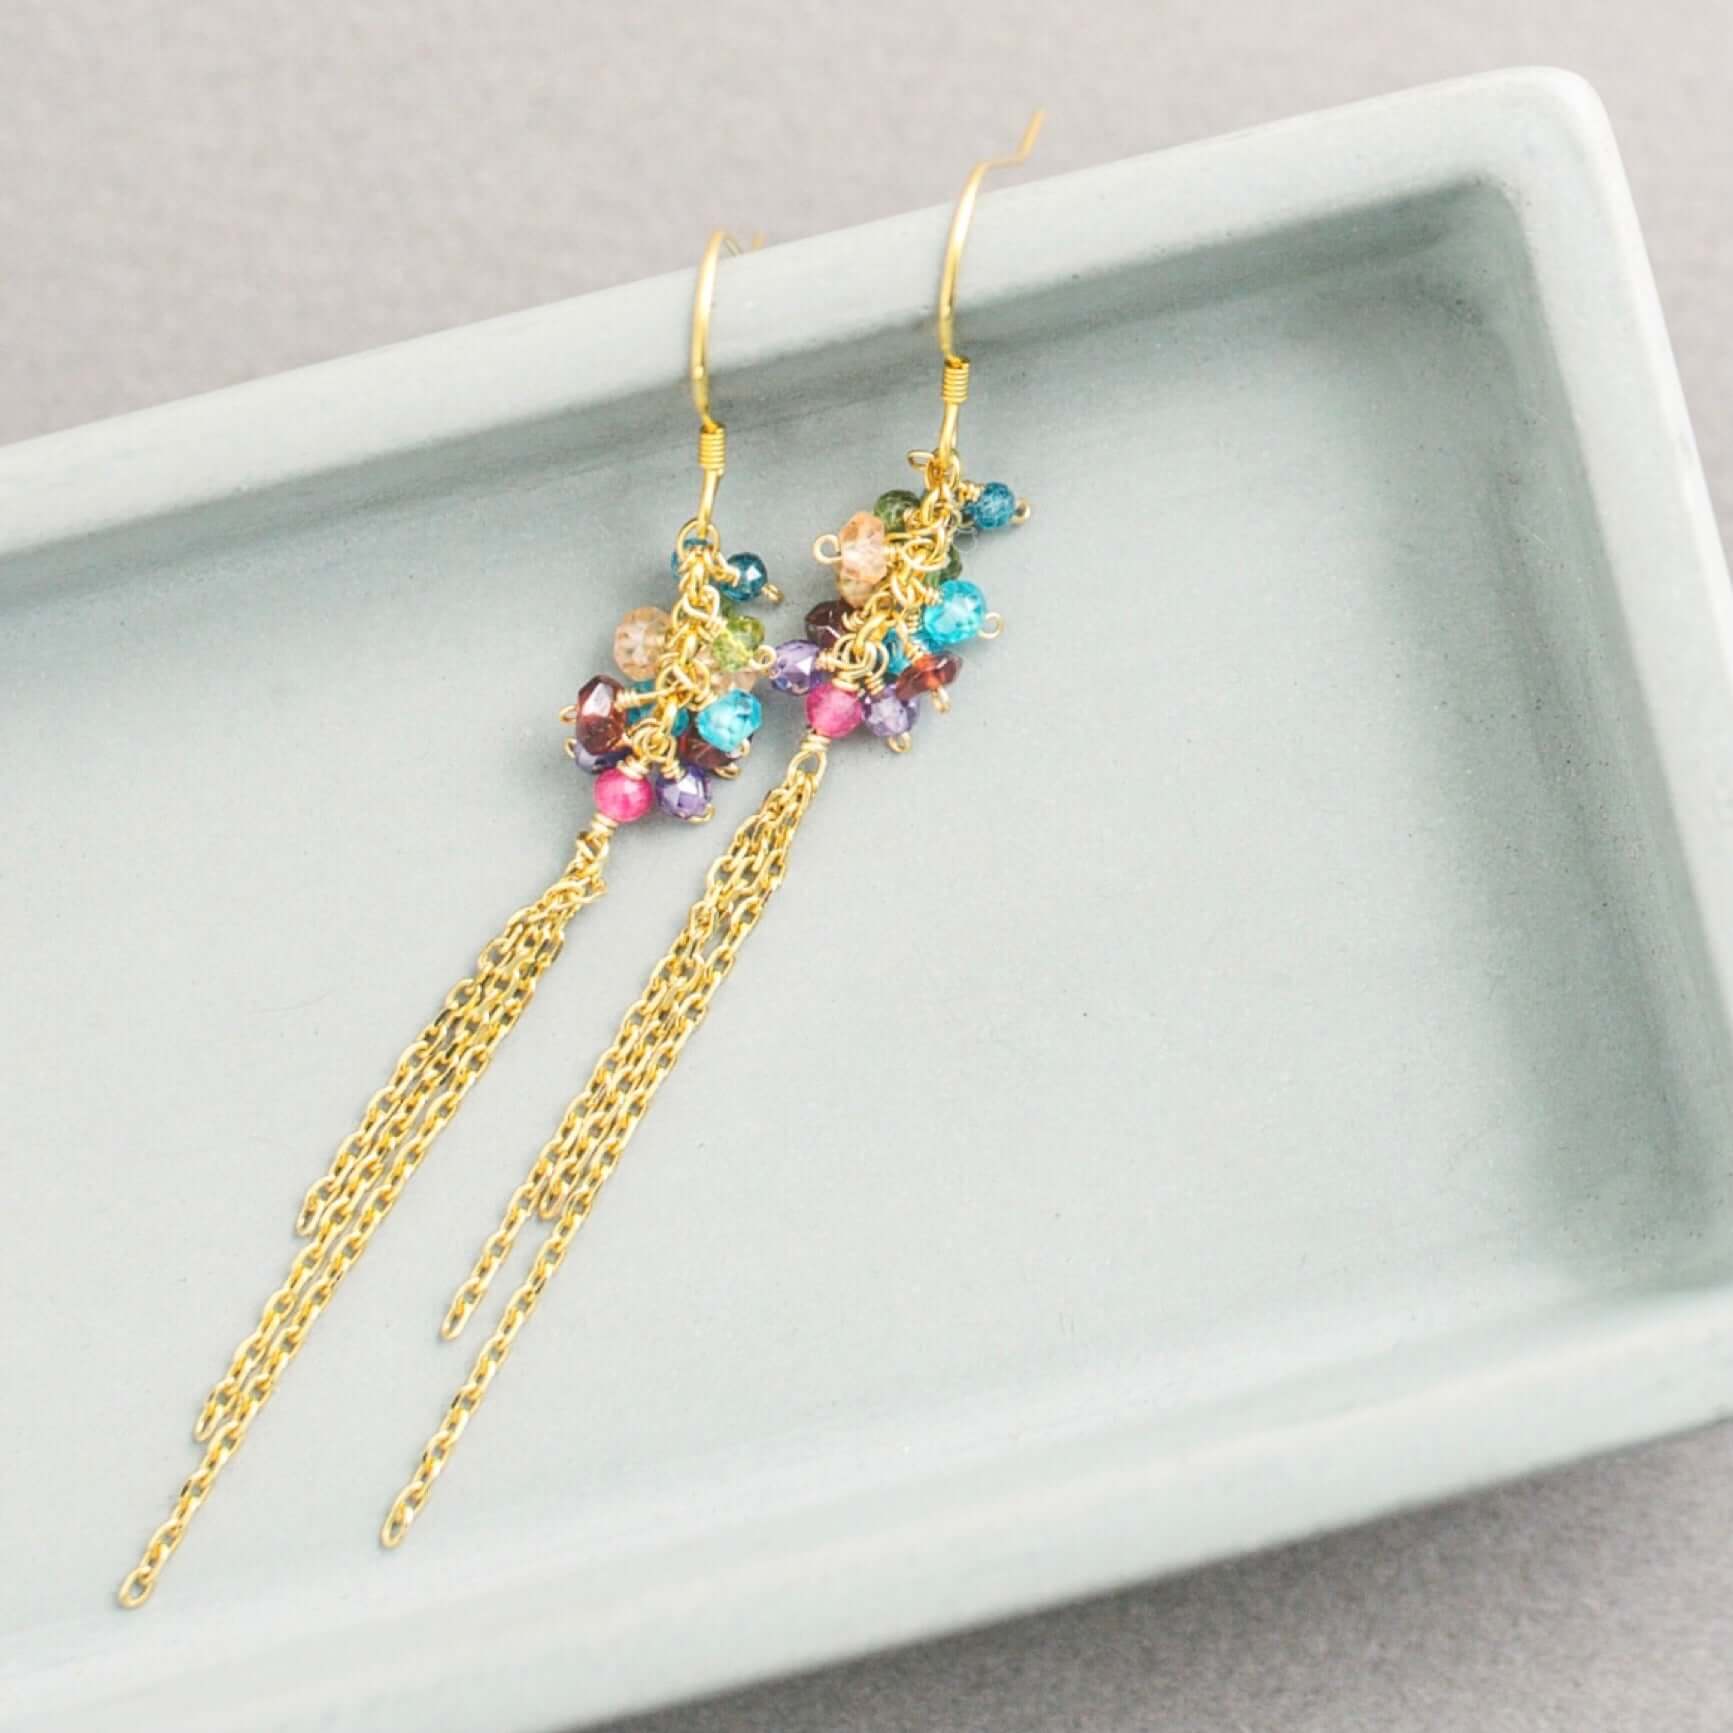 Long Earrings featuring Rainbow gemstones and French hooks for a touch of effortless elegance